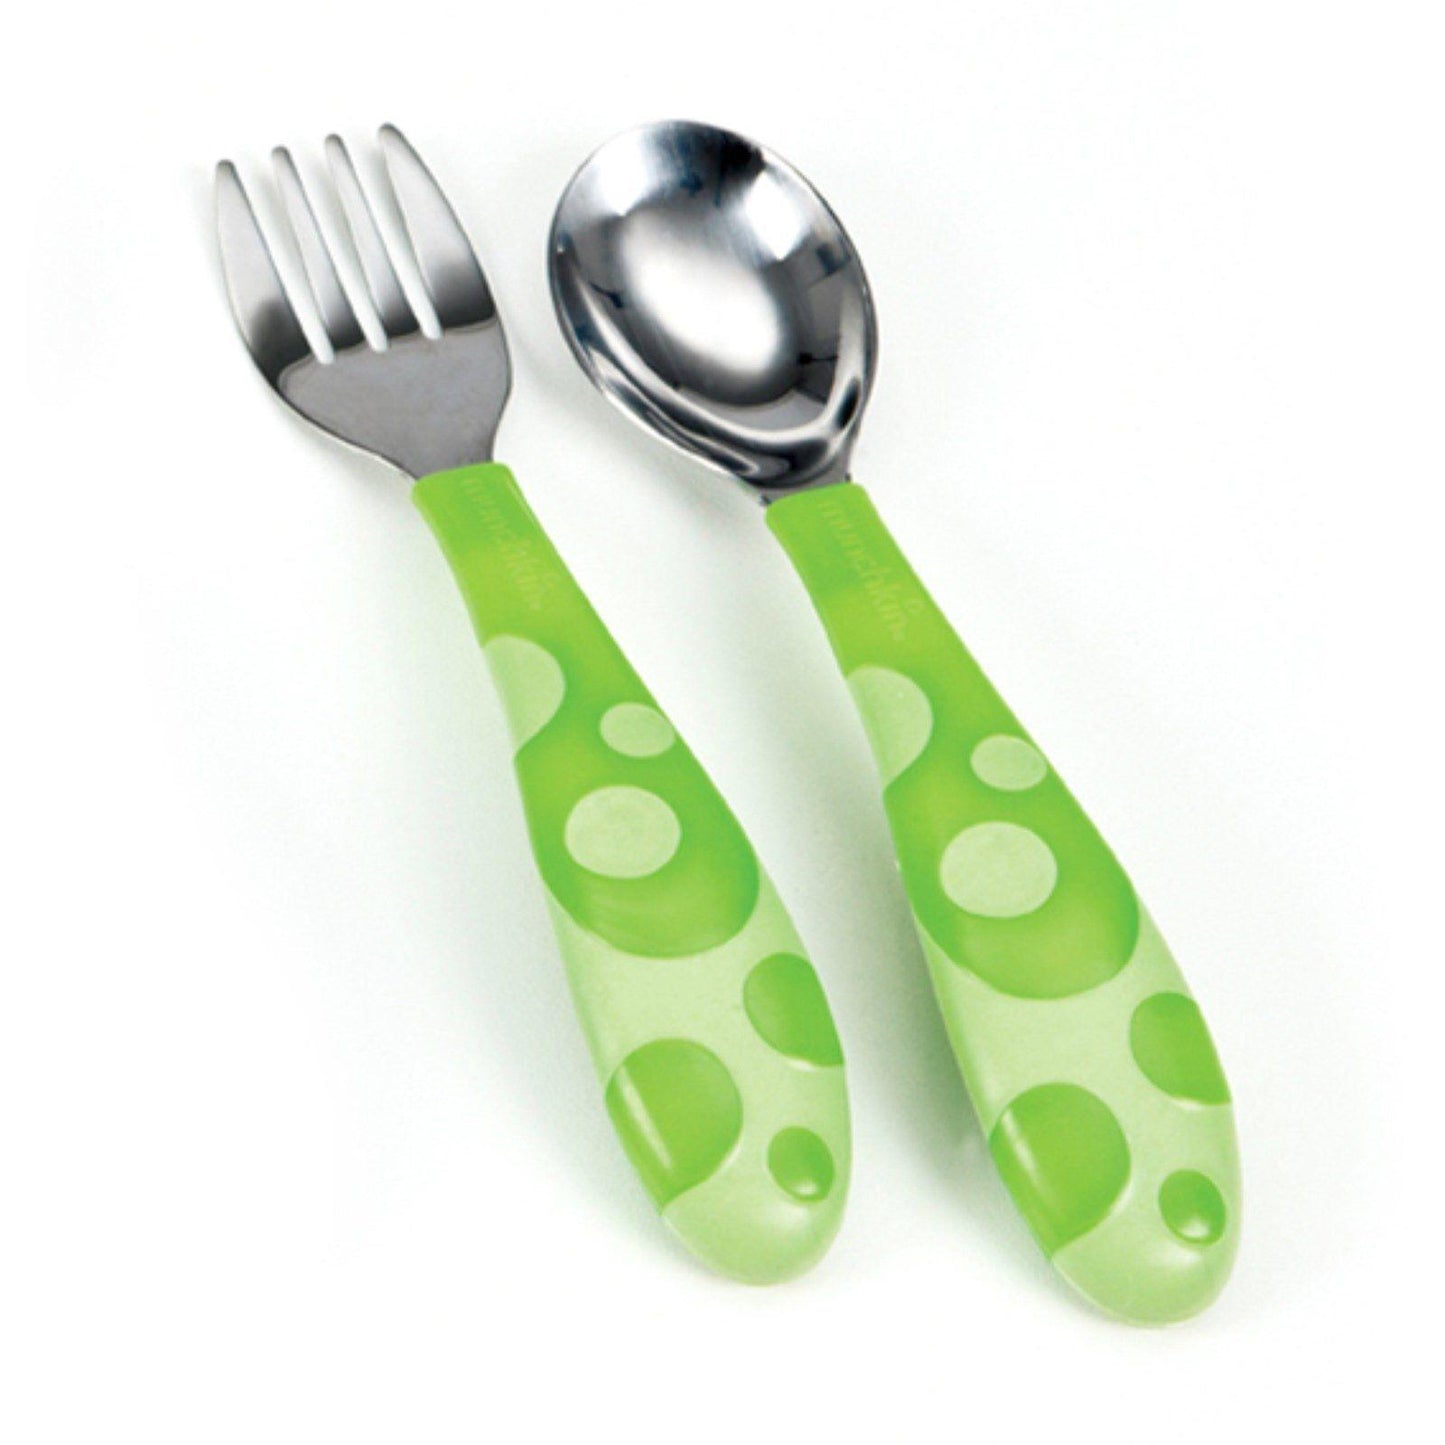 Munchkin Baby Fork and Spoon Cutlery Set Toddler Food Feeding 12m+